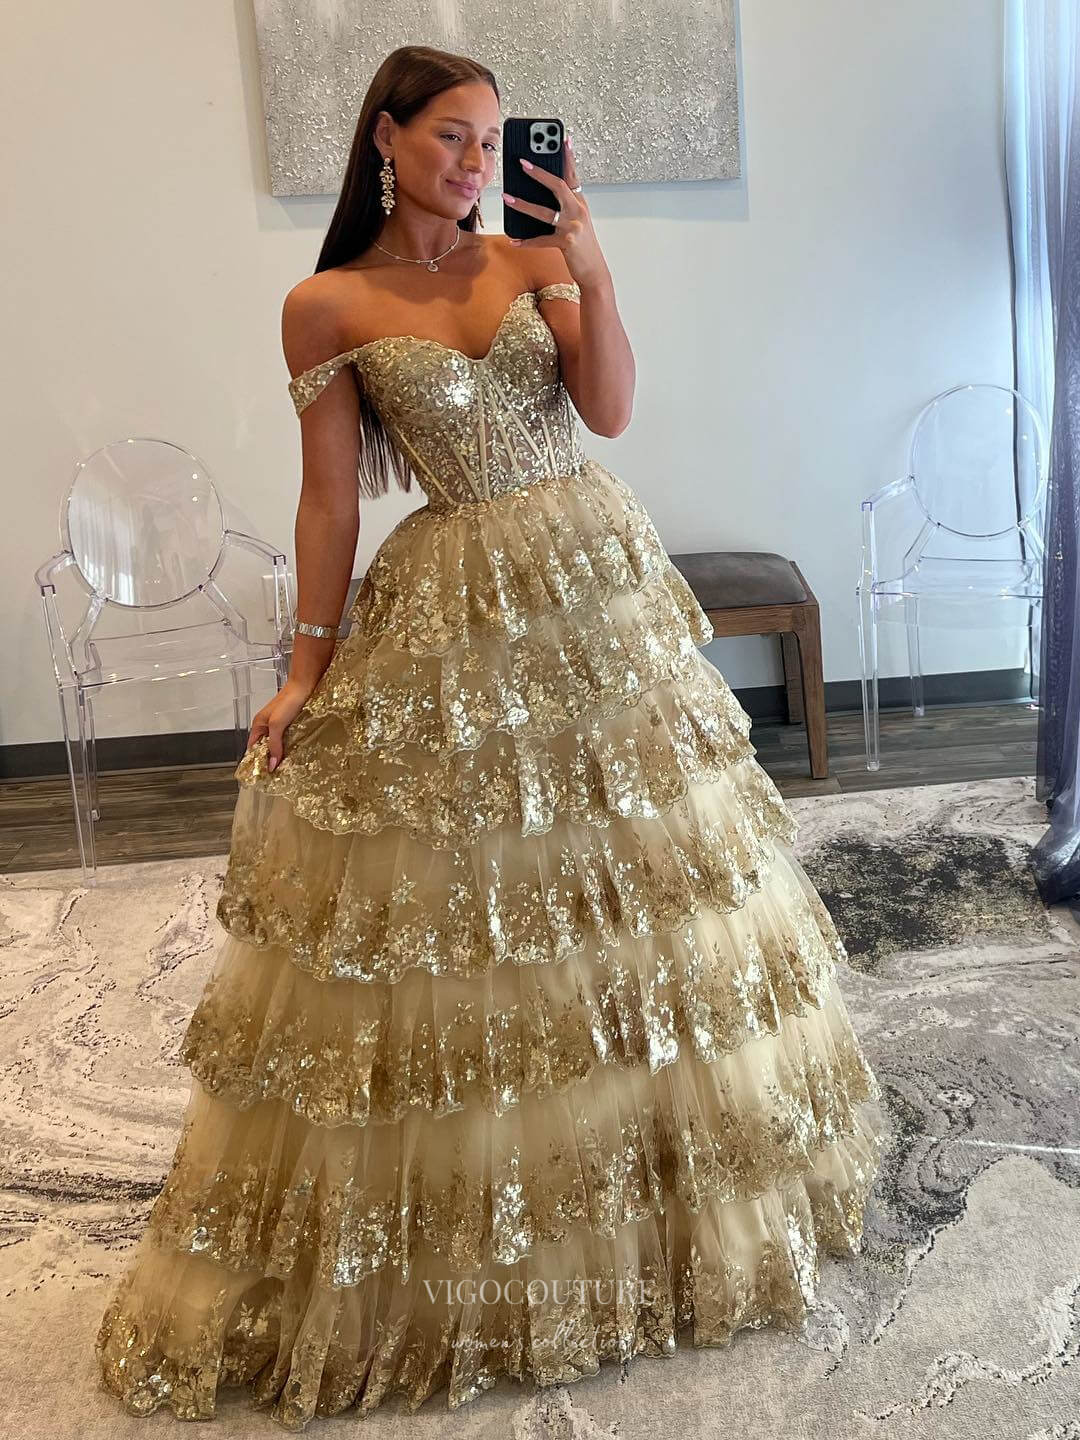 Elegant 2022 Gold Gold Evening Dress With Long Sleeves, Illusion Bow Belt,  Floral Applique, Beading, Sequins, And Rhinestones Perfect For Formal  Parties And Proms From Crown2014, $117.43 | DHgate.Com